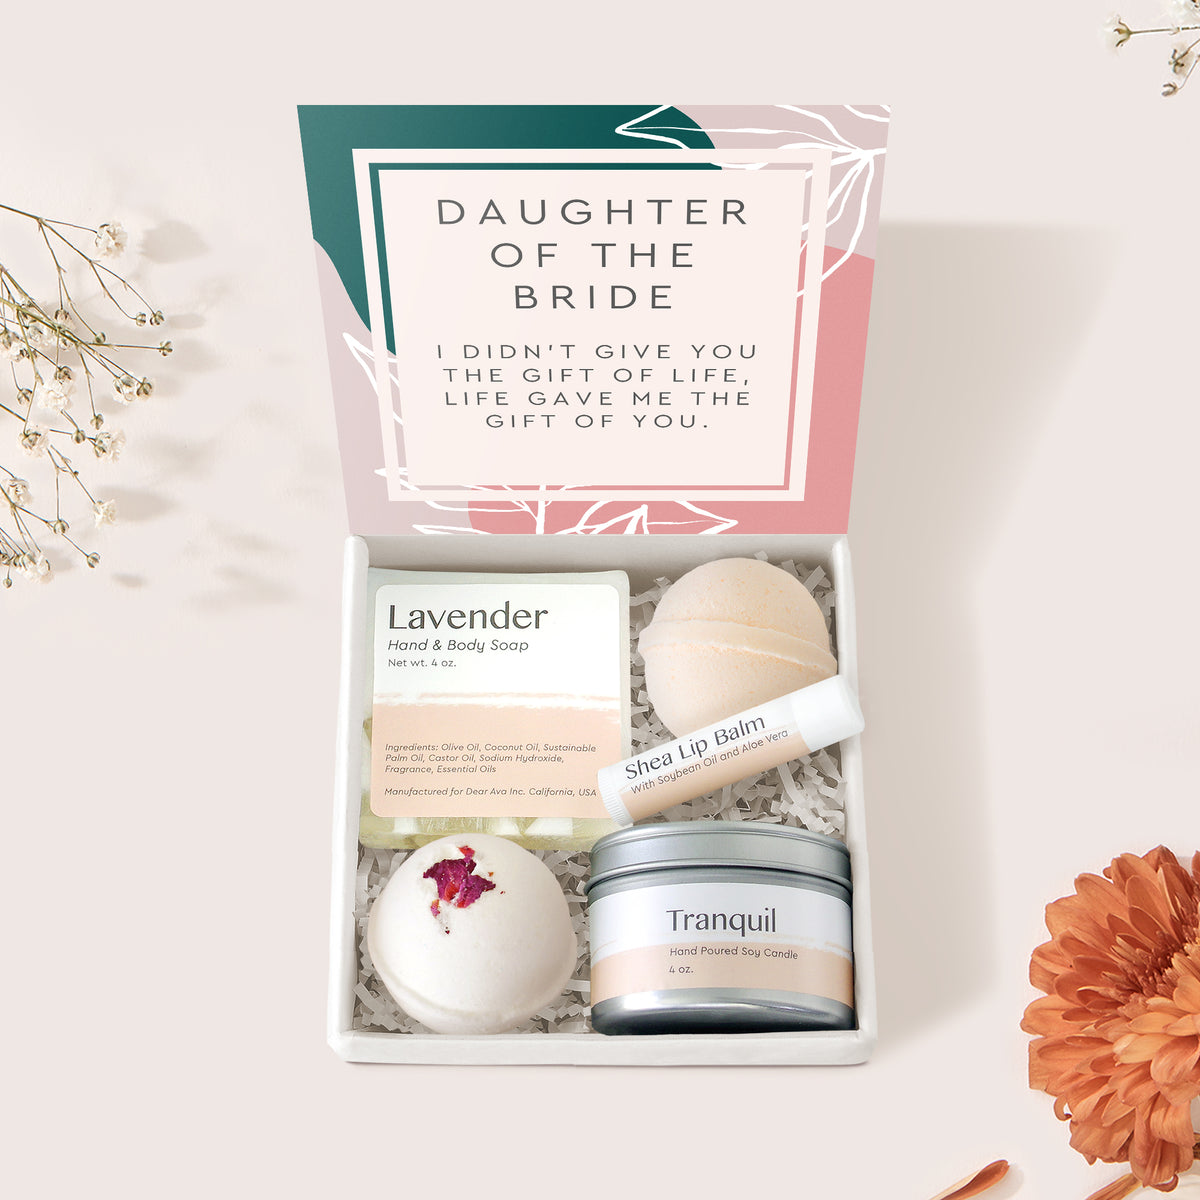 Daughter of the Bride Spa Gift Box